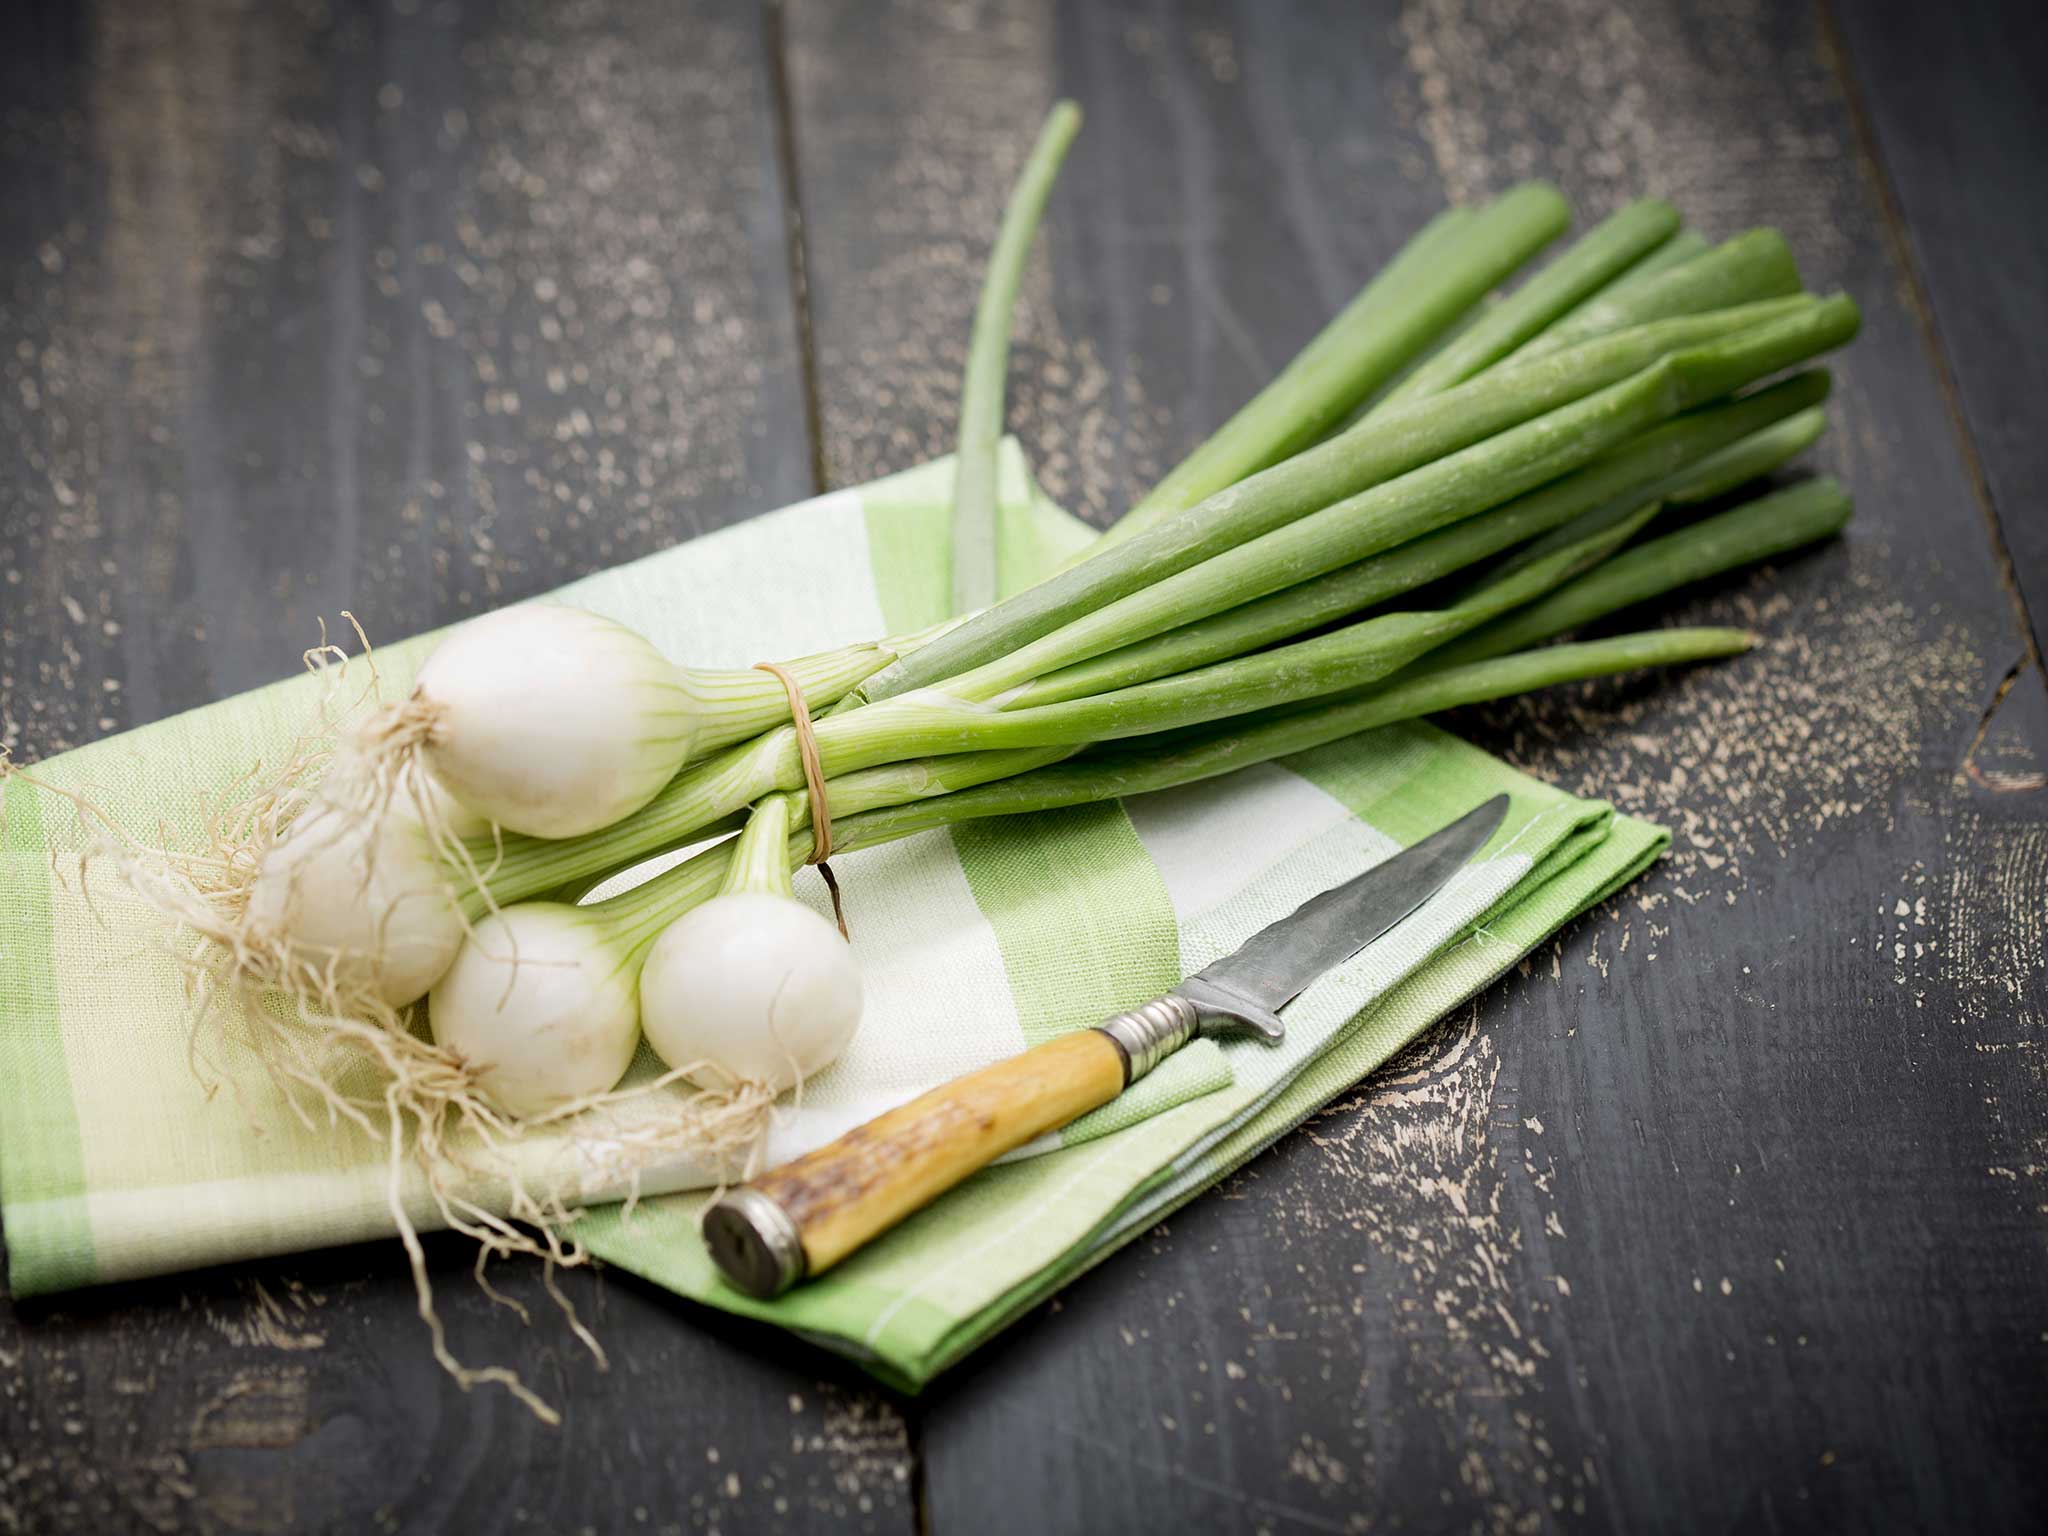 Customers were confusing spring onions (pictured) with daffodils